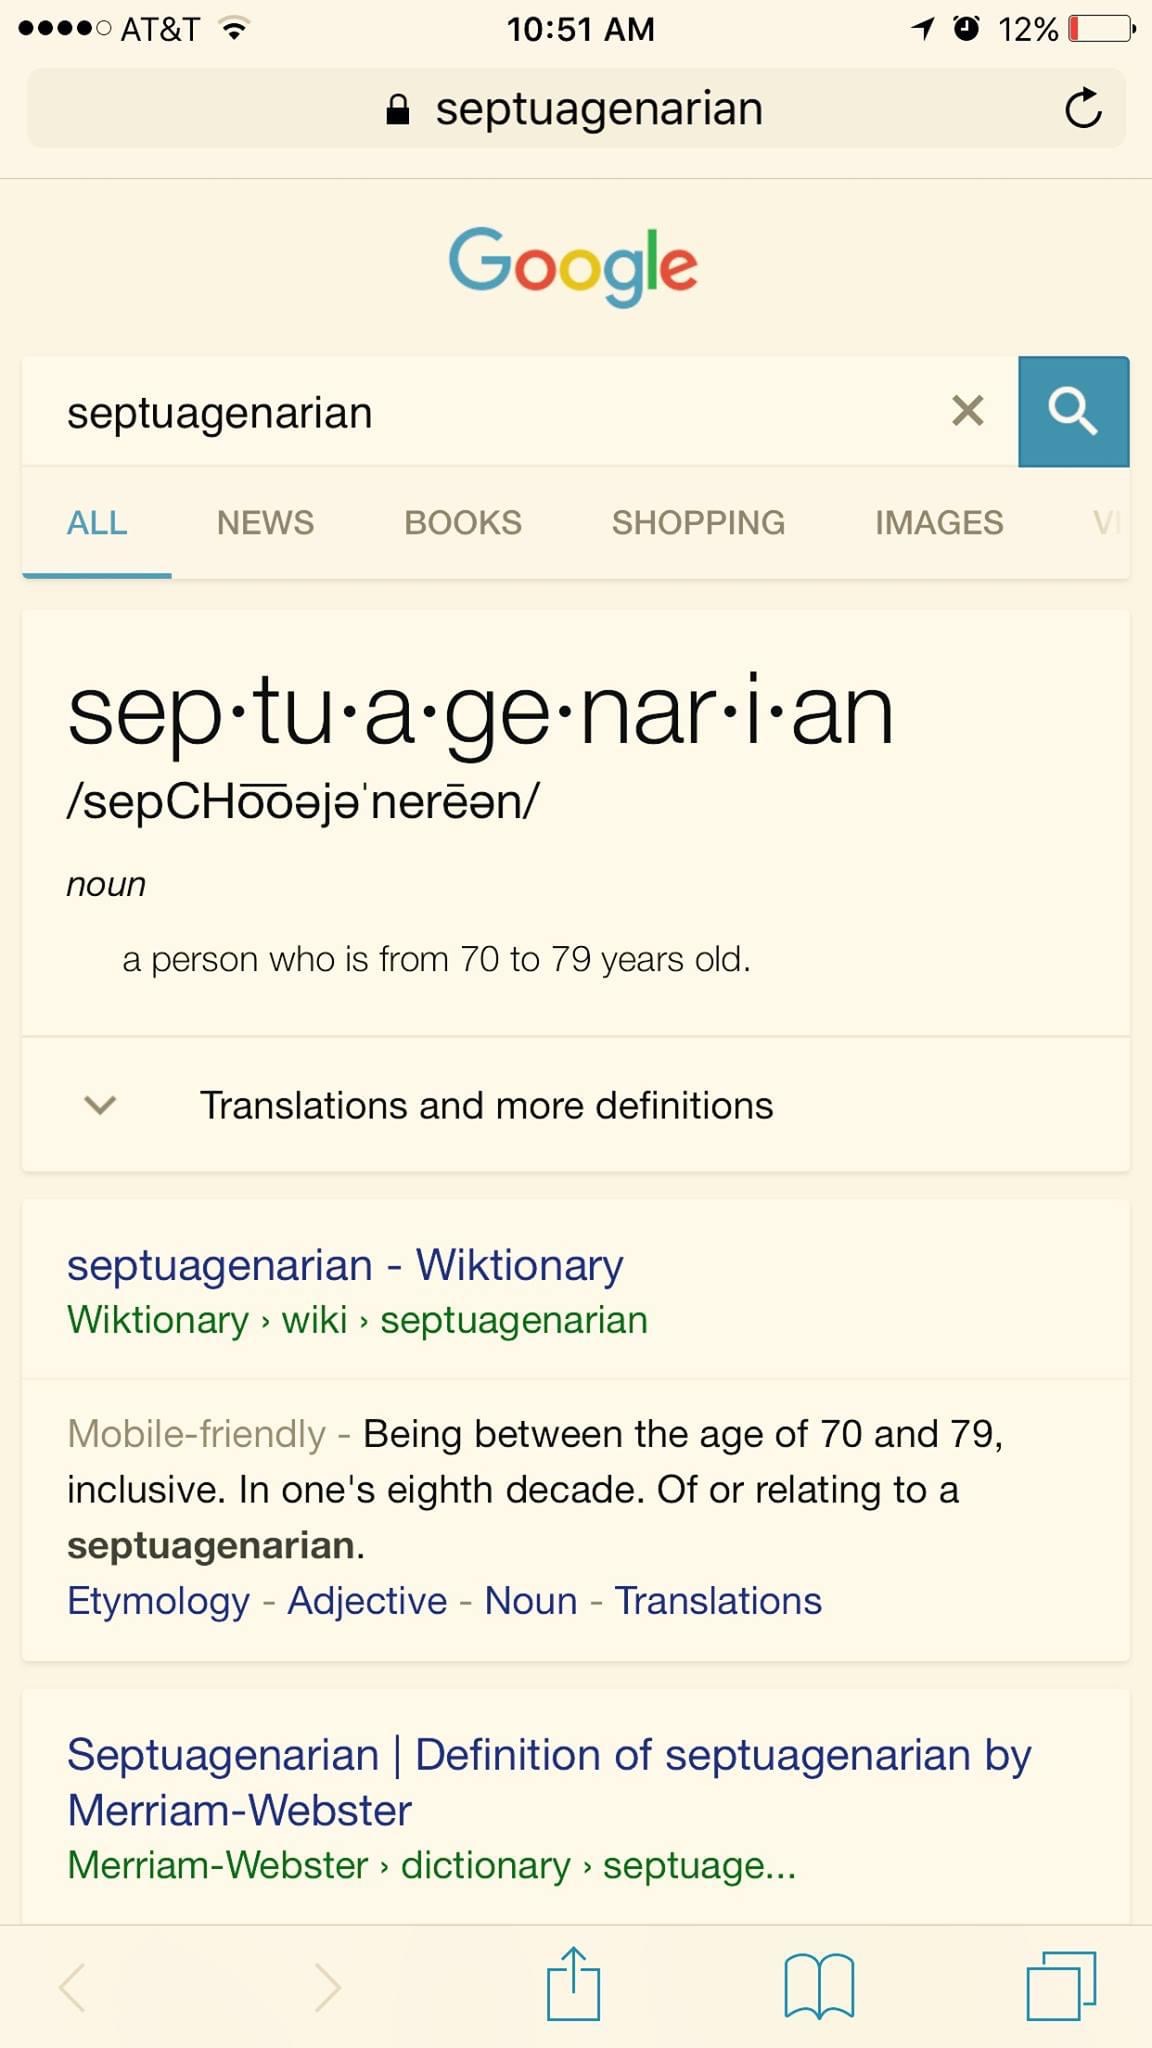 web page - At&T 12% . septuagenarian C Google septuagenarian X Q All News Books Shopping Images septua.genar.i.an sepHooaja nern noun a person who is from 70 to 79 years old. Translations and more definitions septuagenarian Wiktionary Wiktionary wiki > se